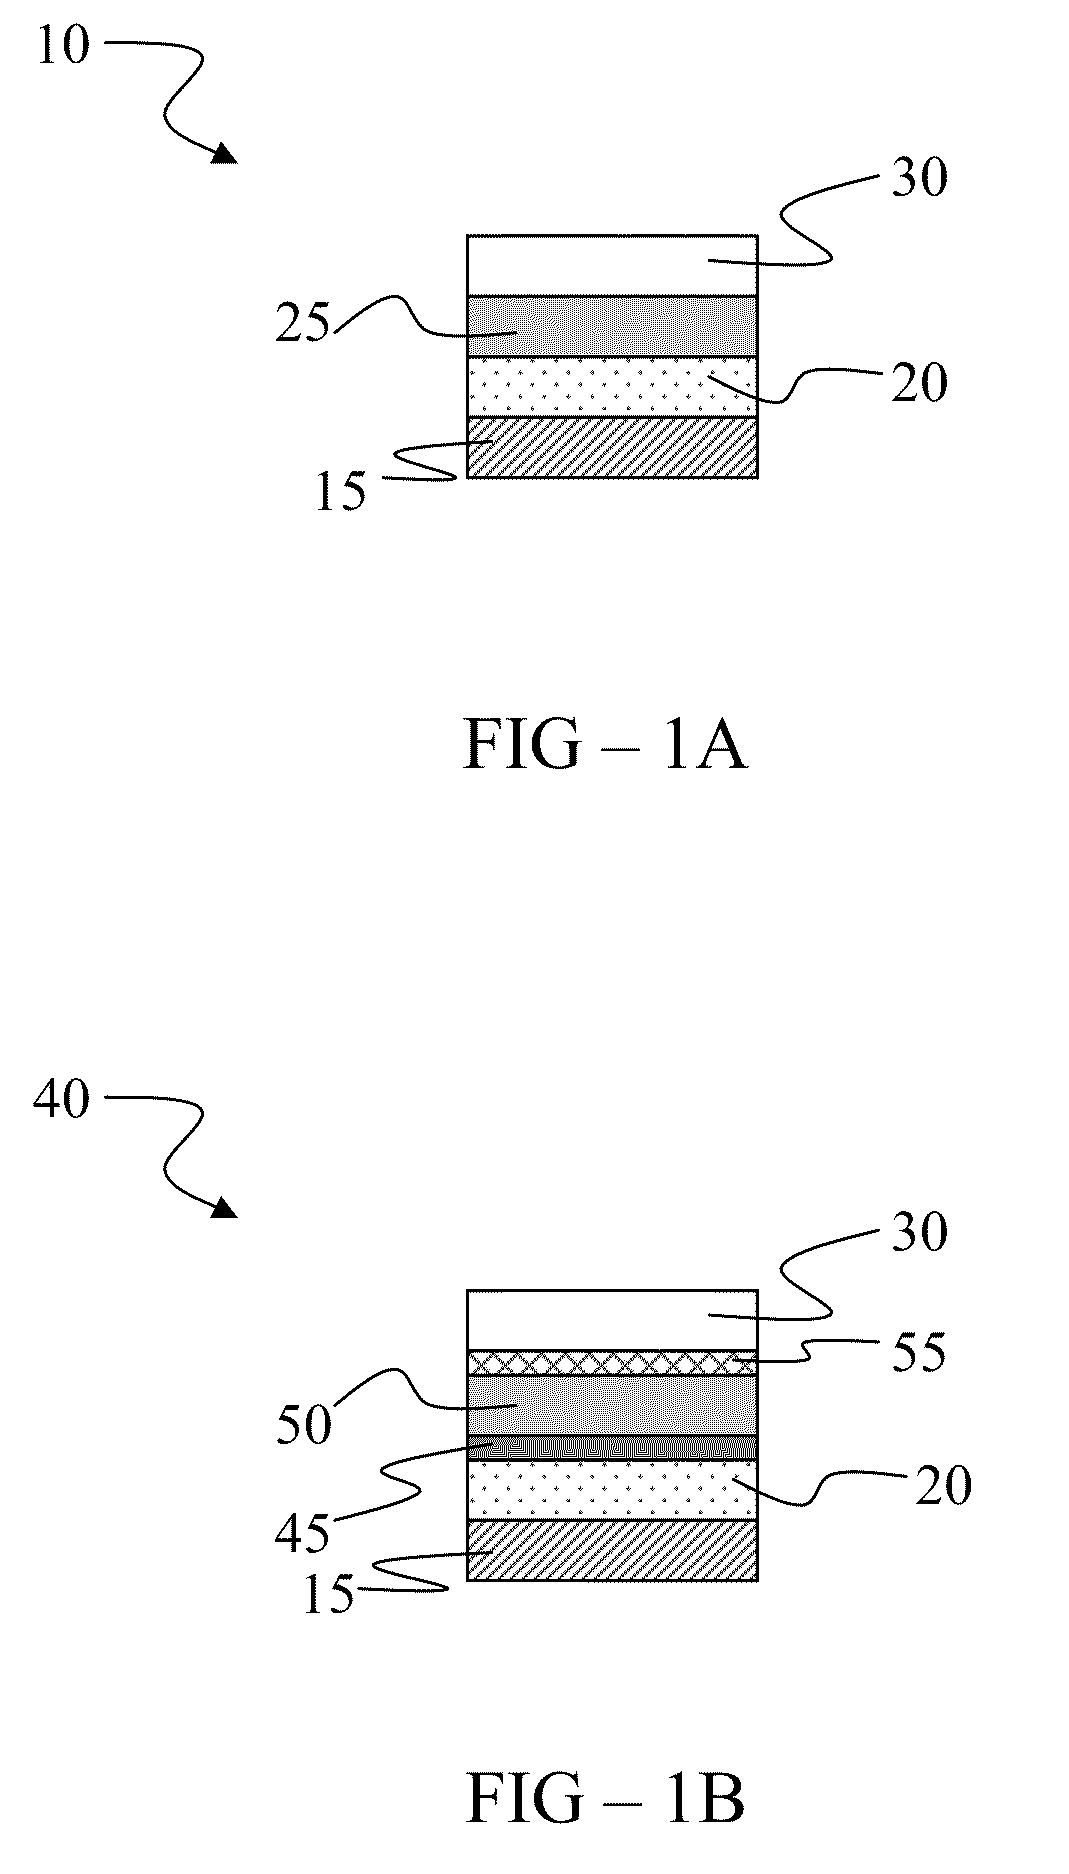 Monolithic Integration of Photovoltaic Cells